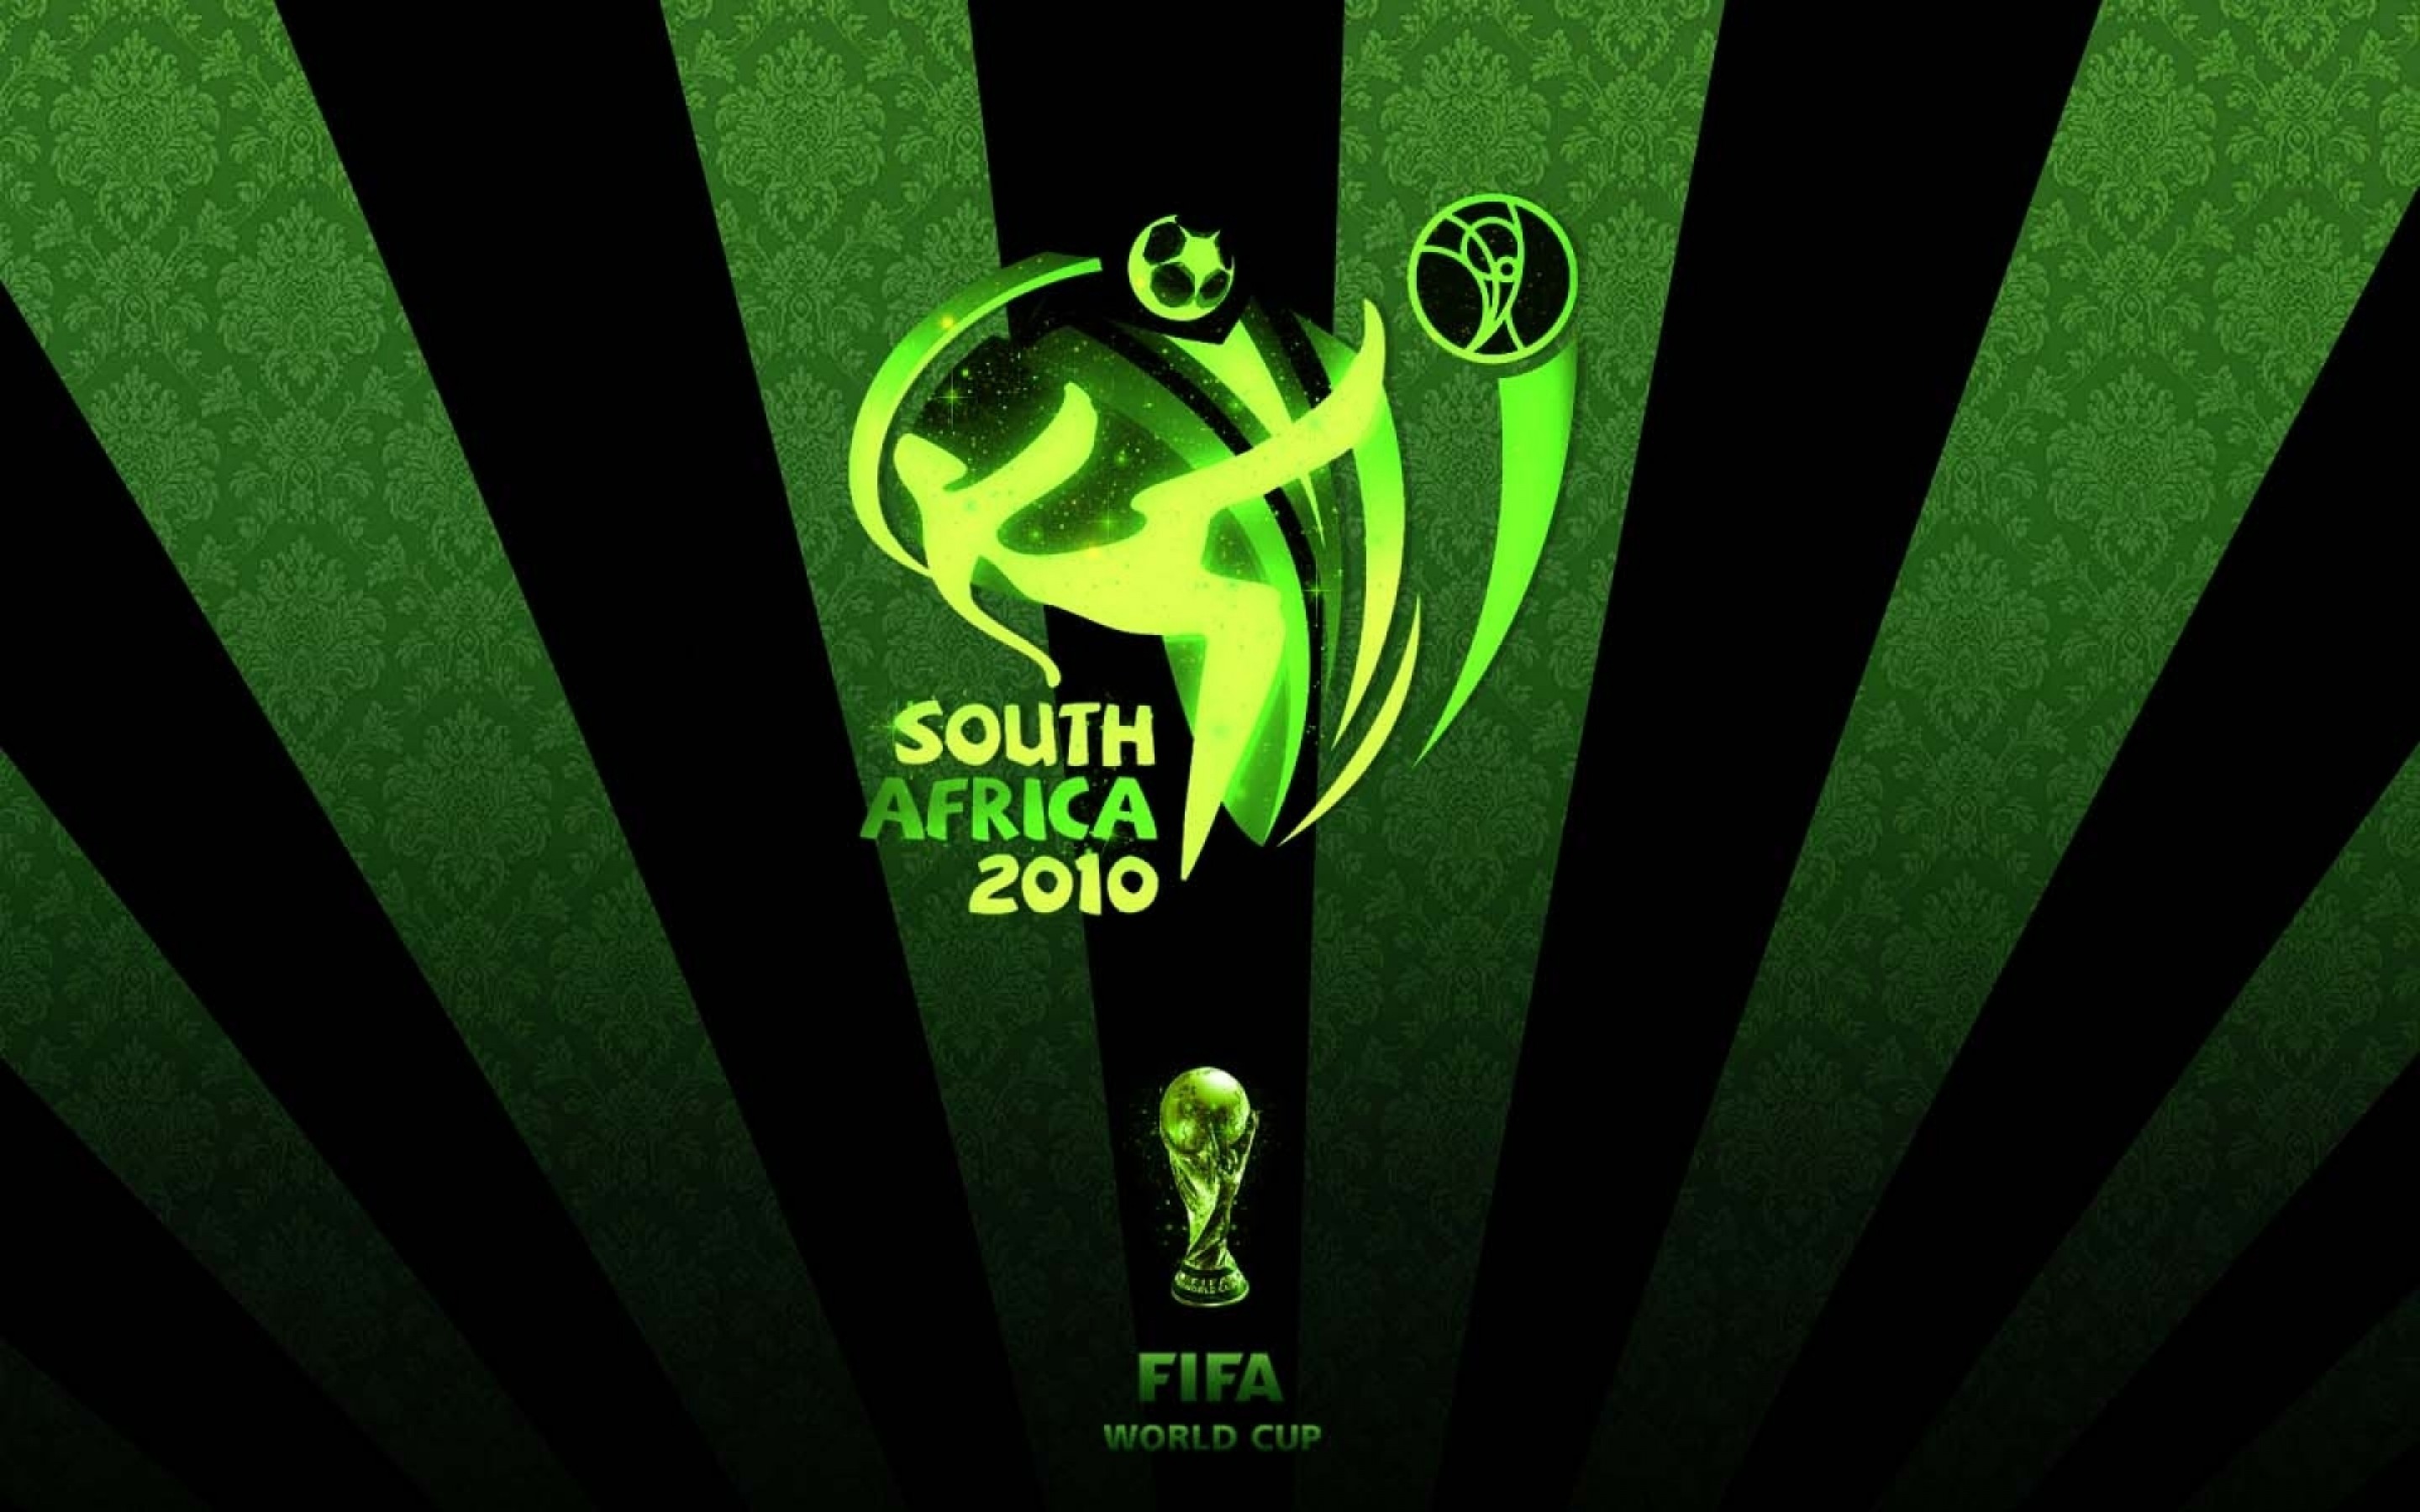 World cup 2010. 2010 World Cup South Africa. FIFA World Cup 2010. ФИФА ЮАР 2010.